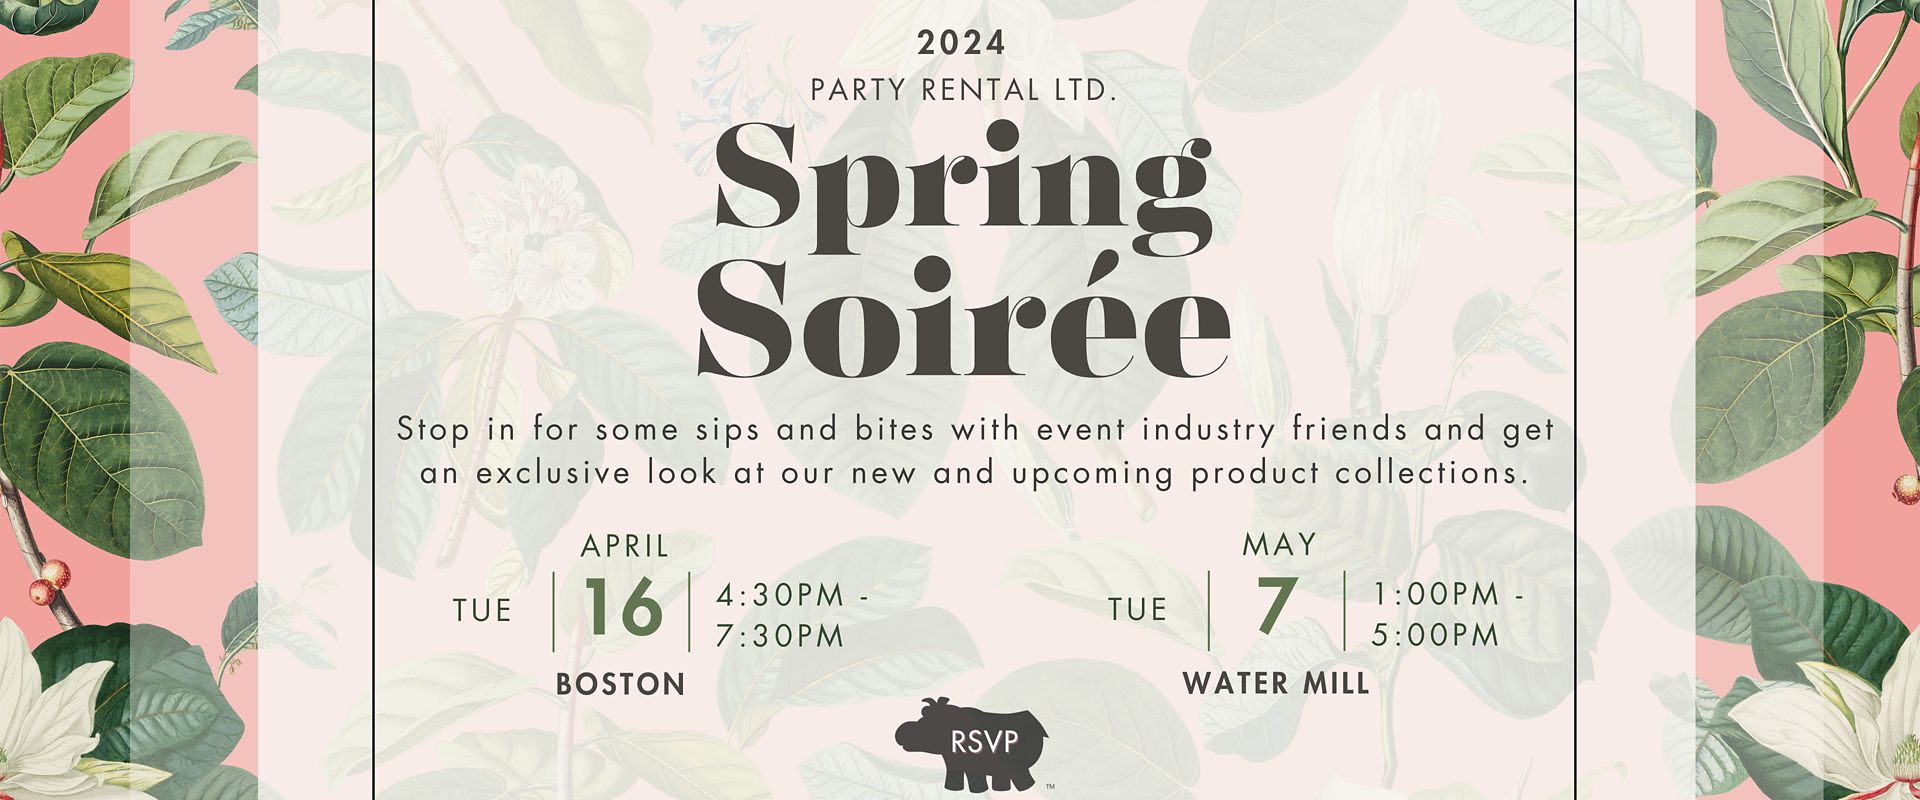 You're Invited to Party Rental Ltd.'s Spring Soiree